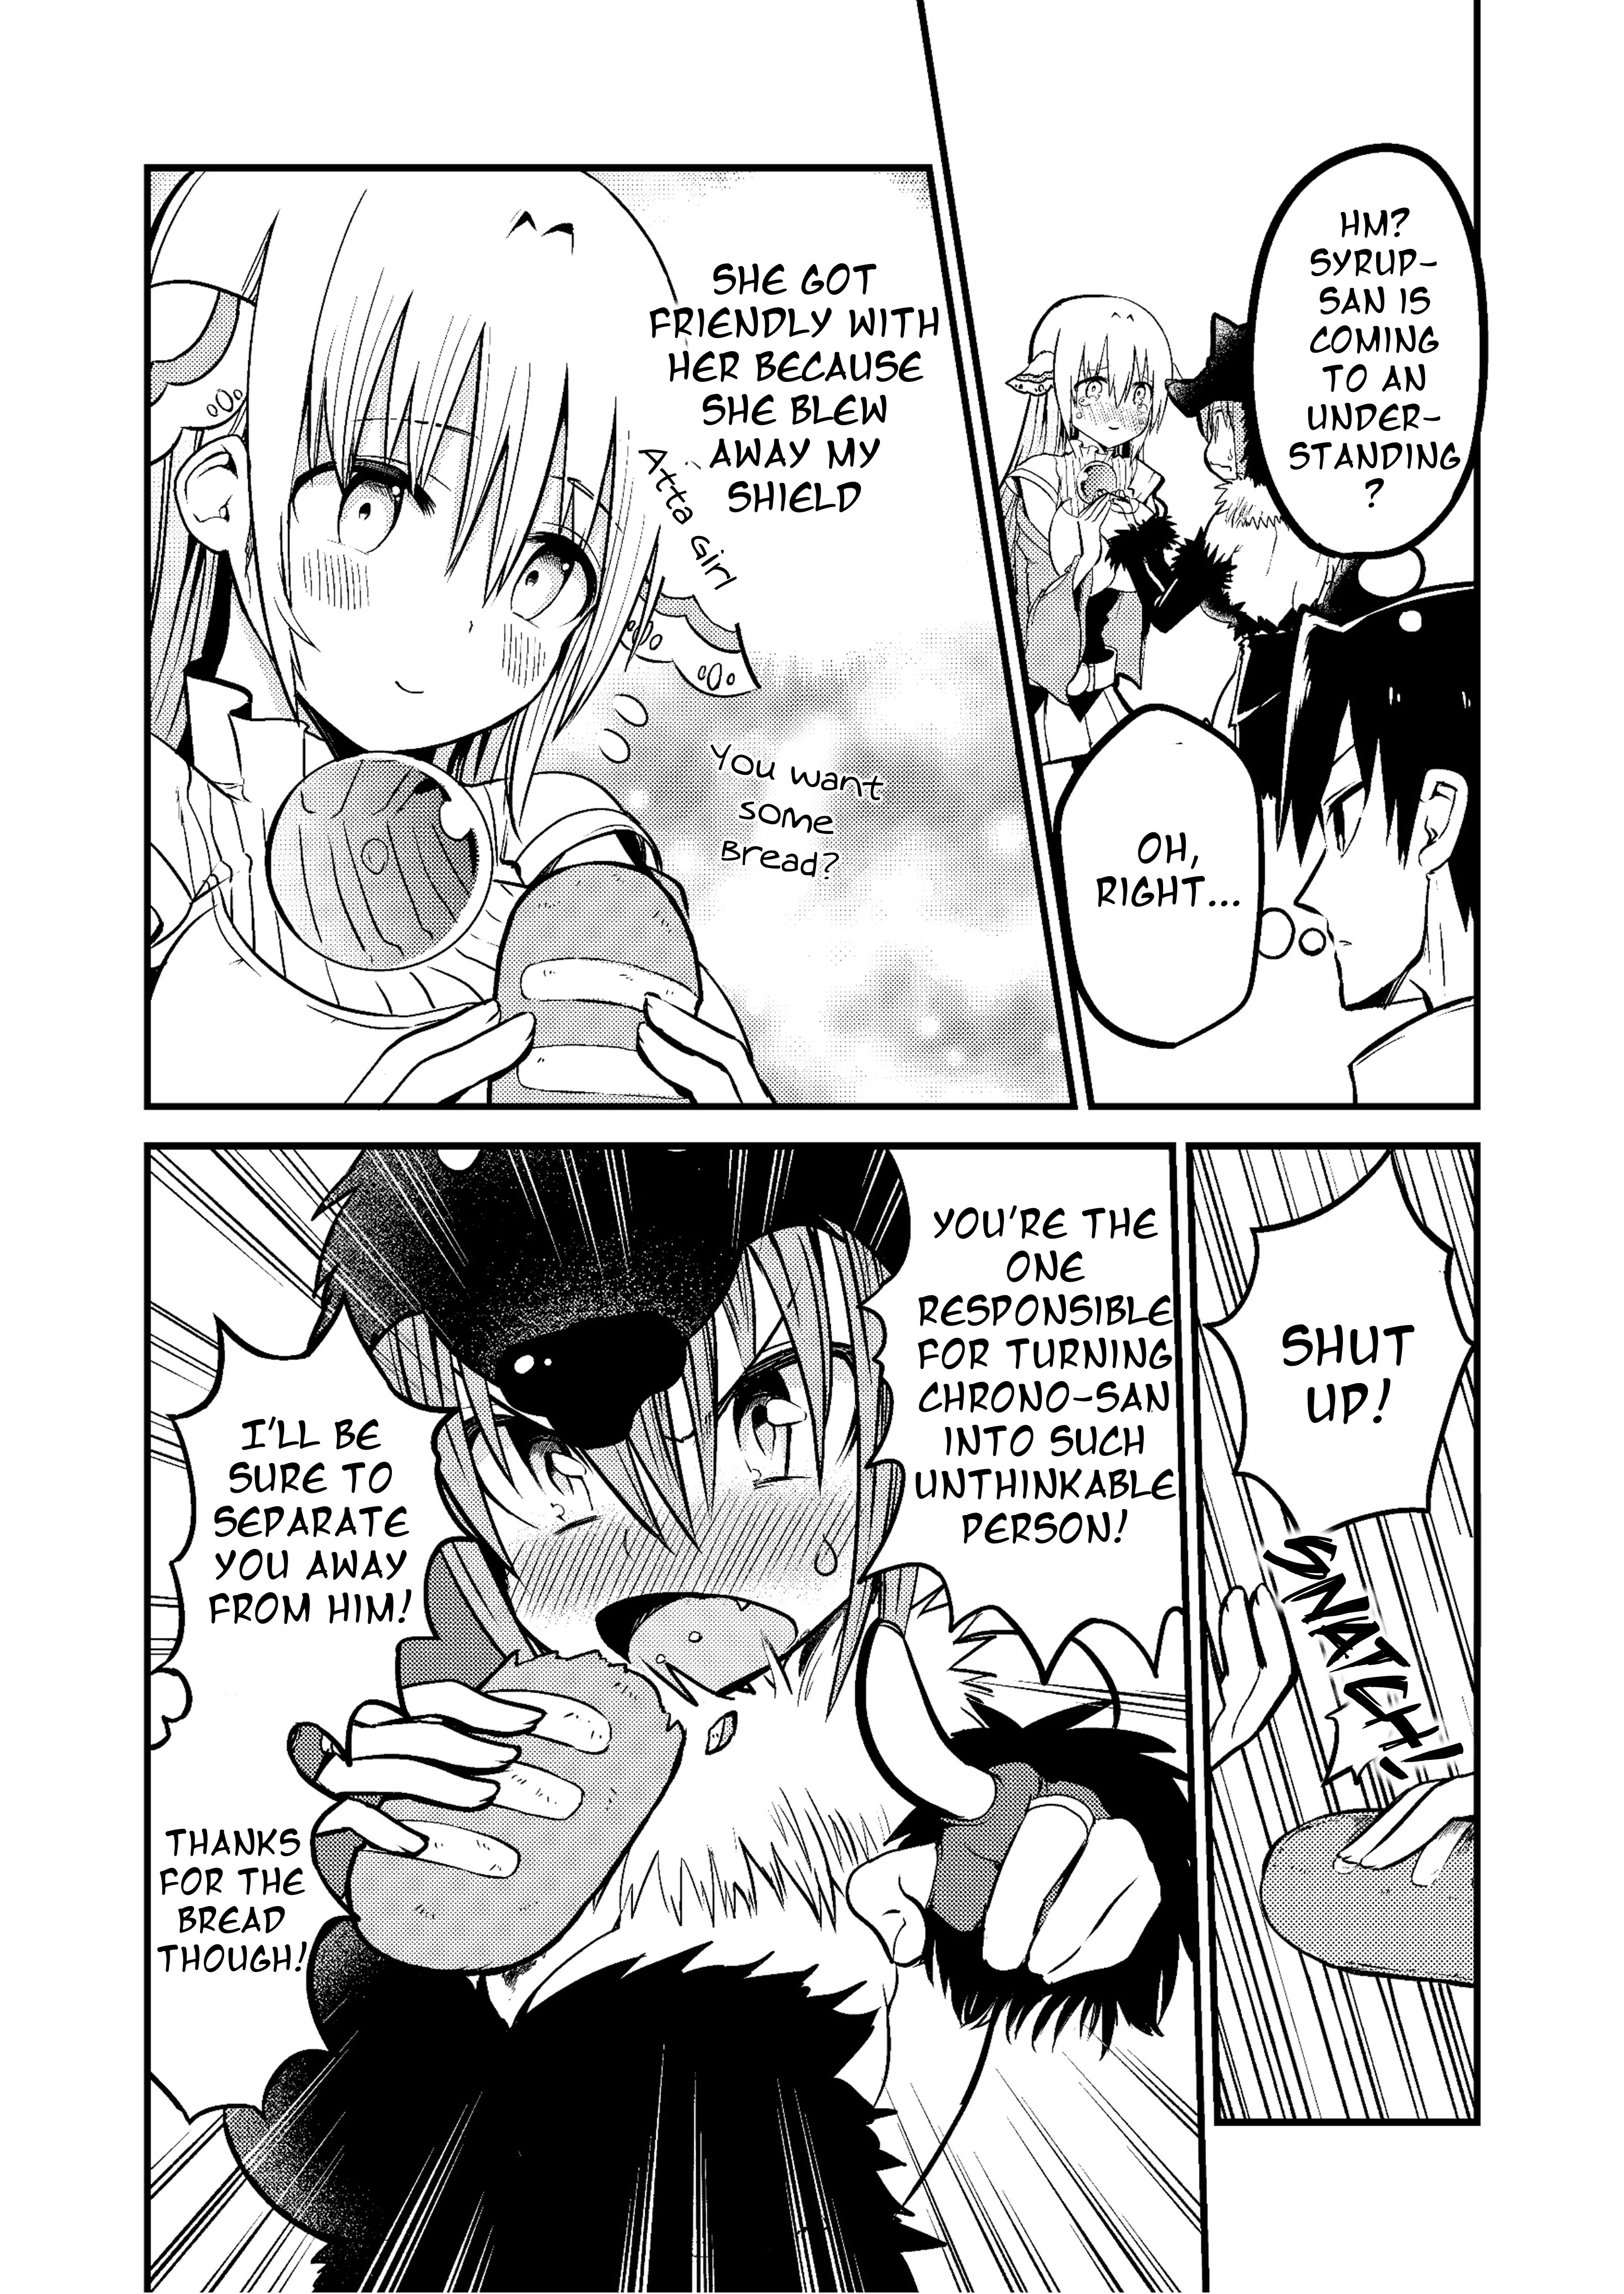 Shiro Madoushi Syrup-San Vol.1 Chapter 12: White Mage Syrup-San And Conflict - Picture 2